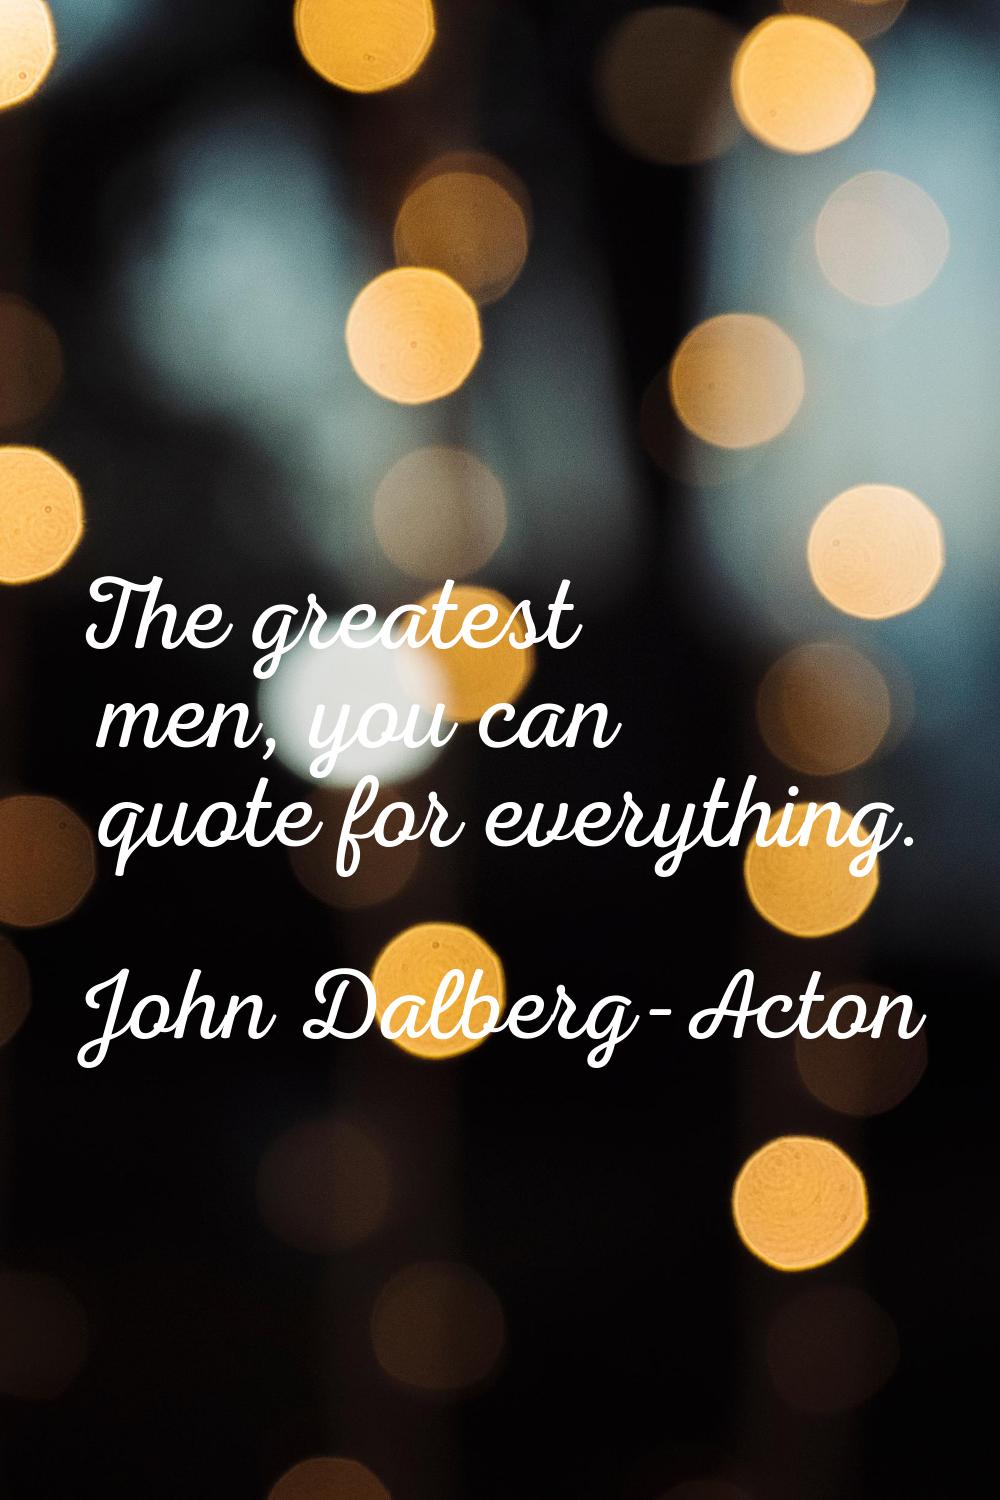 The greatest men, you can quote for everything.